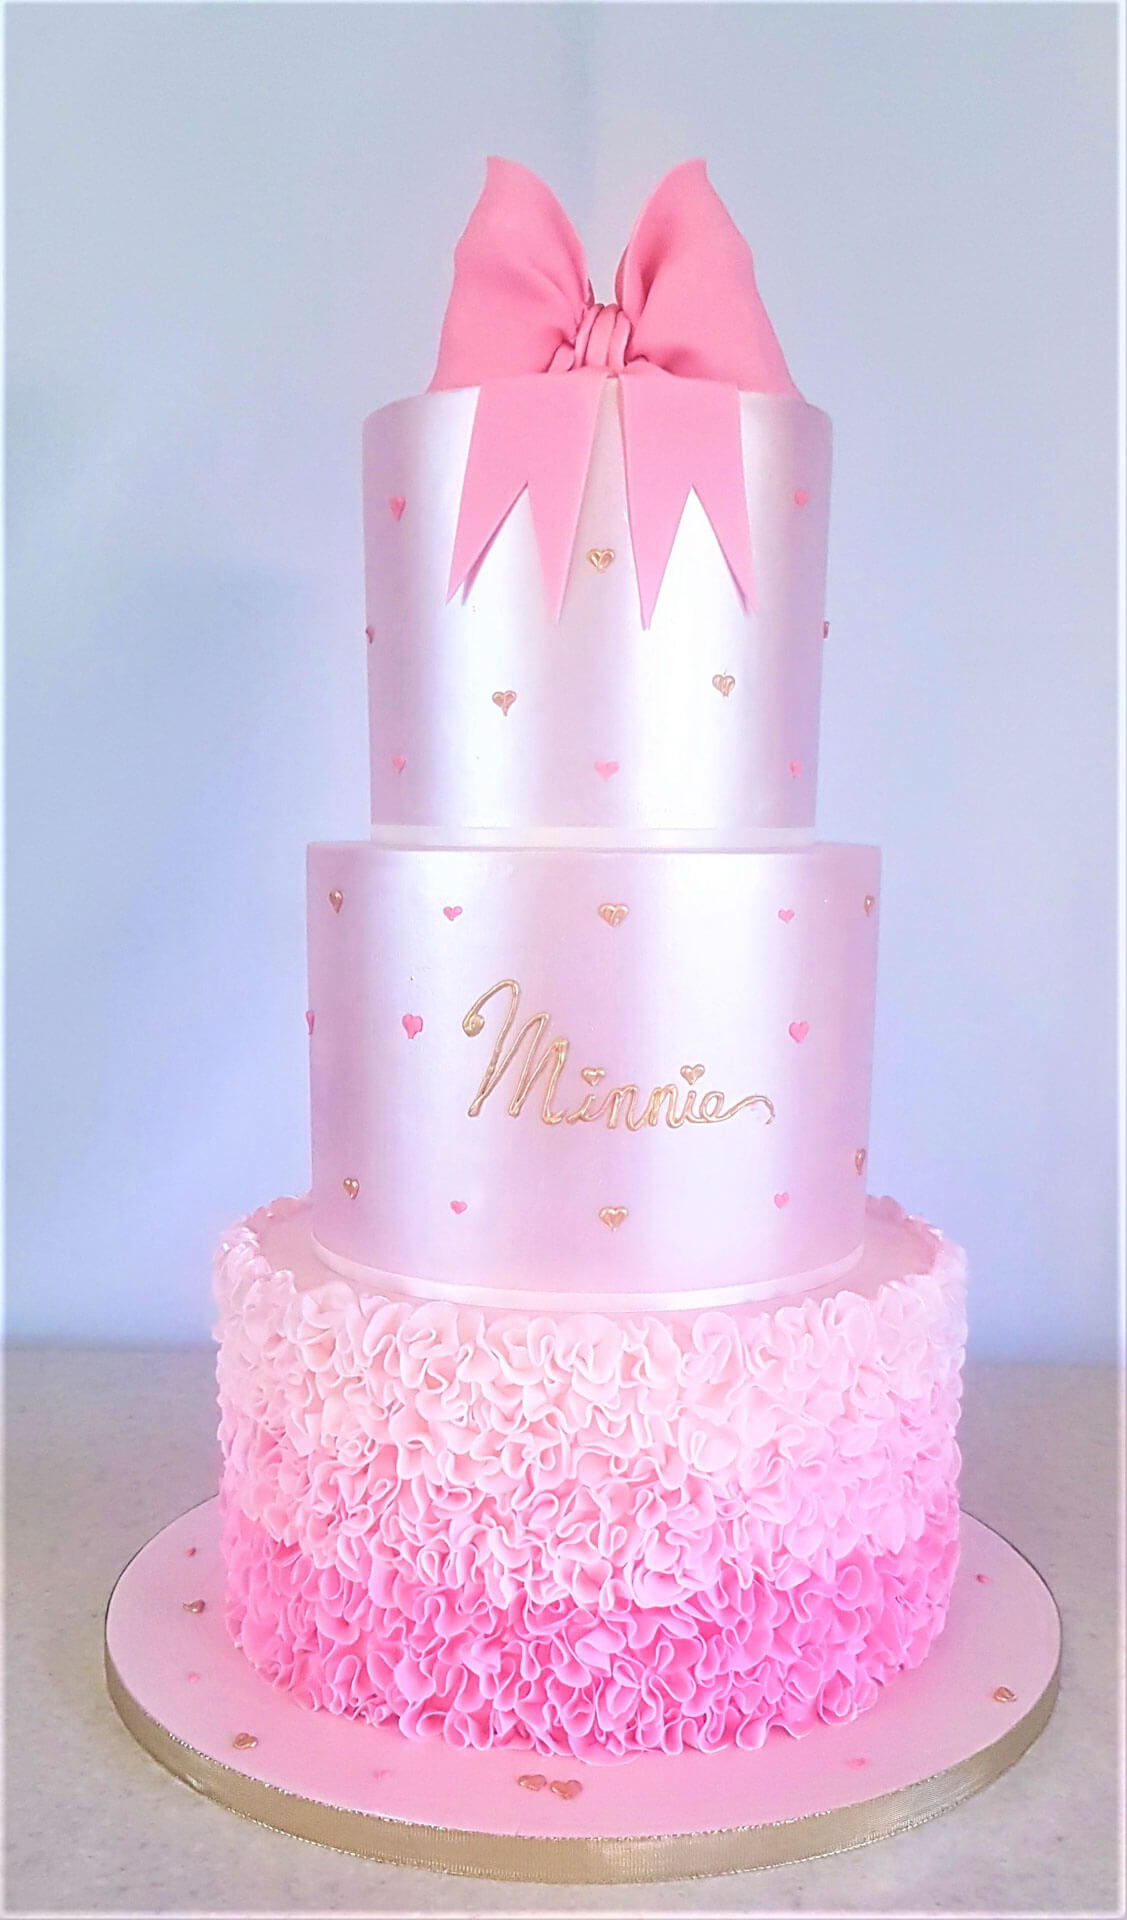 By Yevnig Luxury Special Occasion Childrens Birthday Cakes